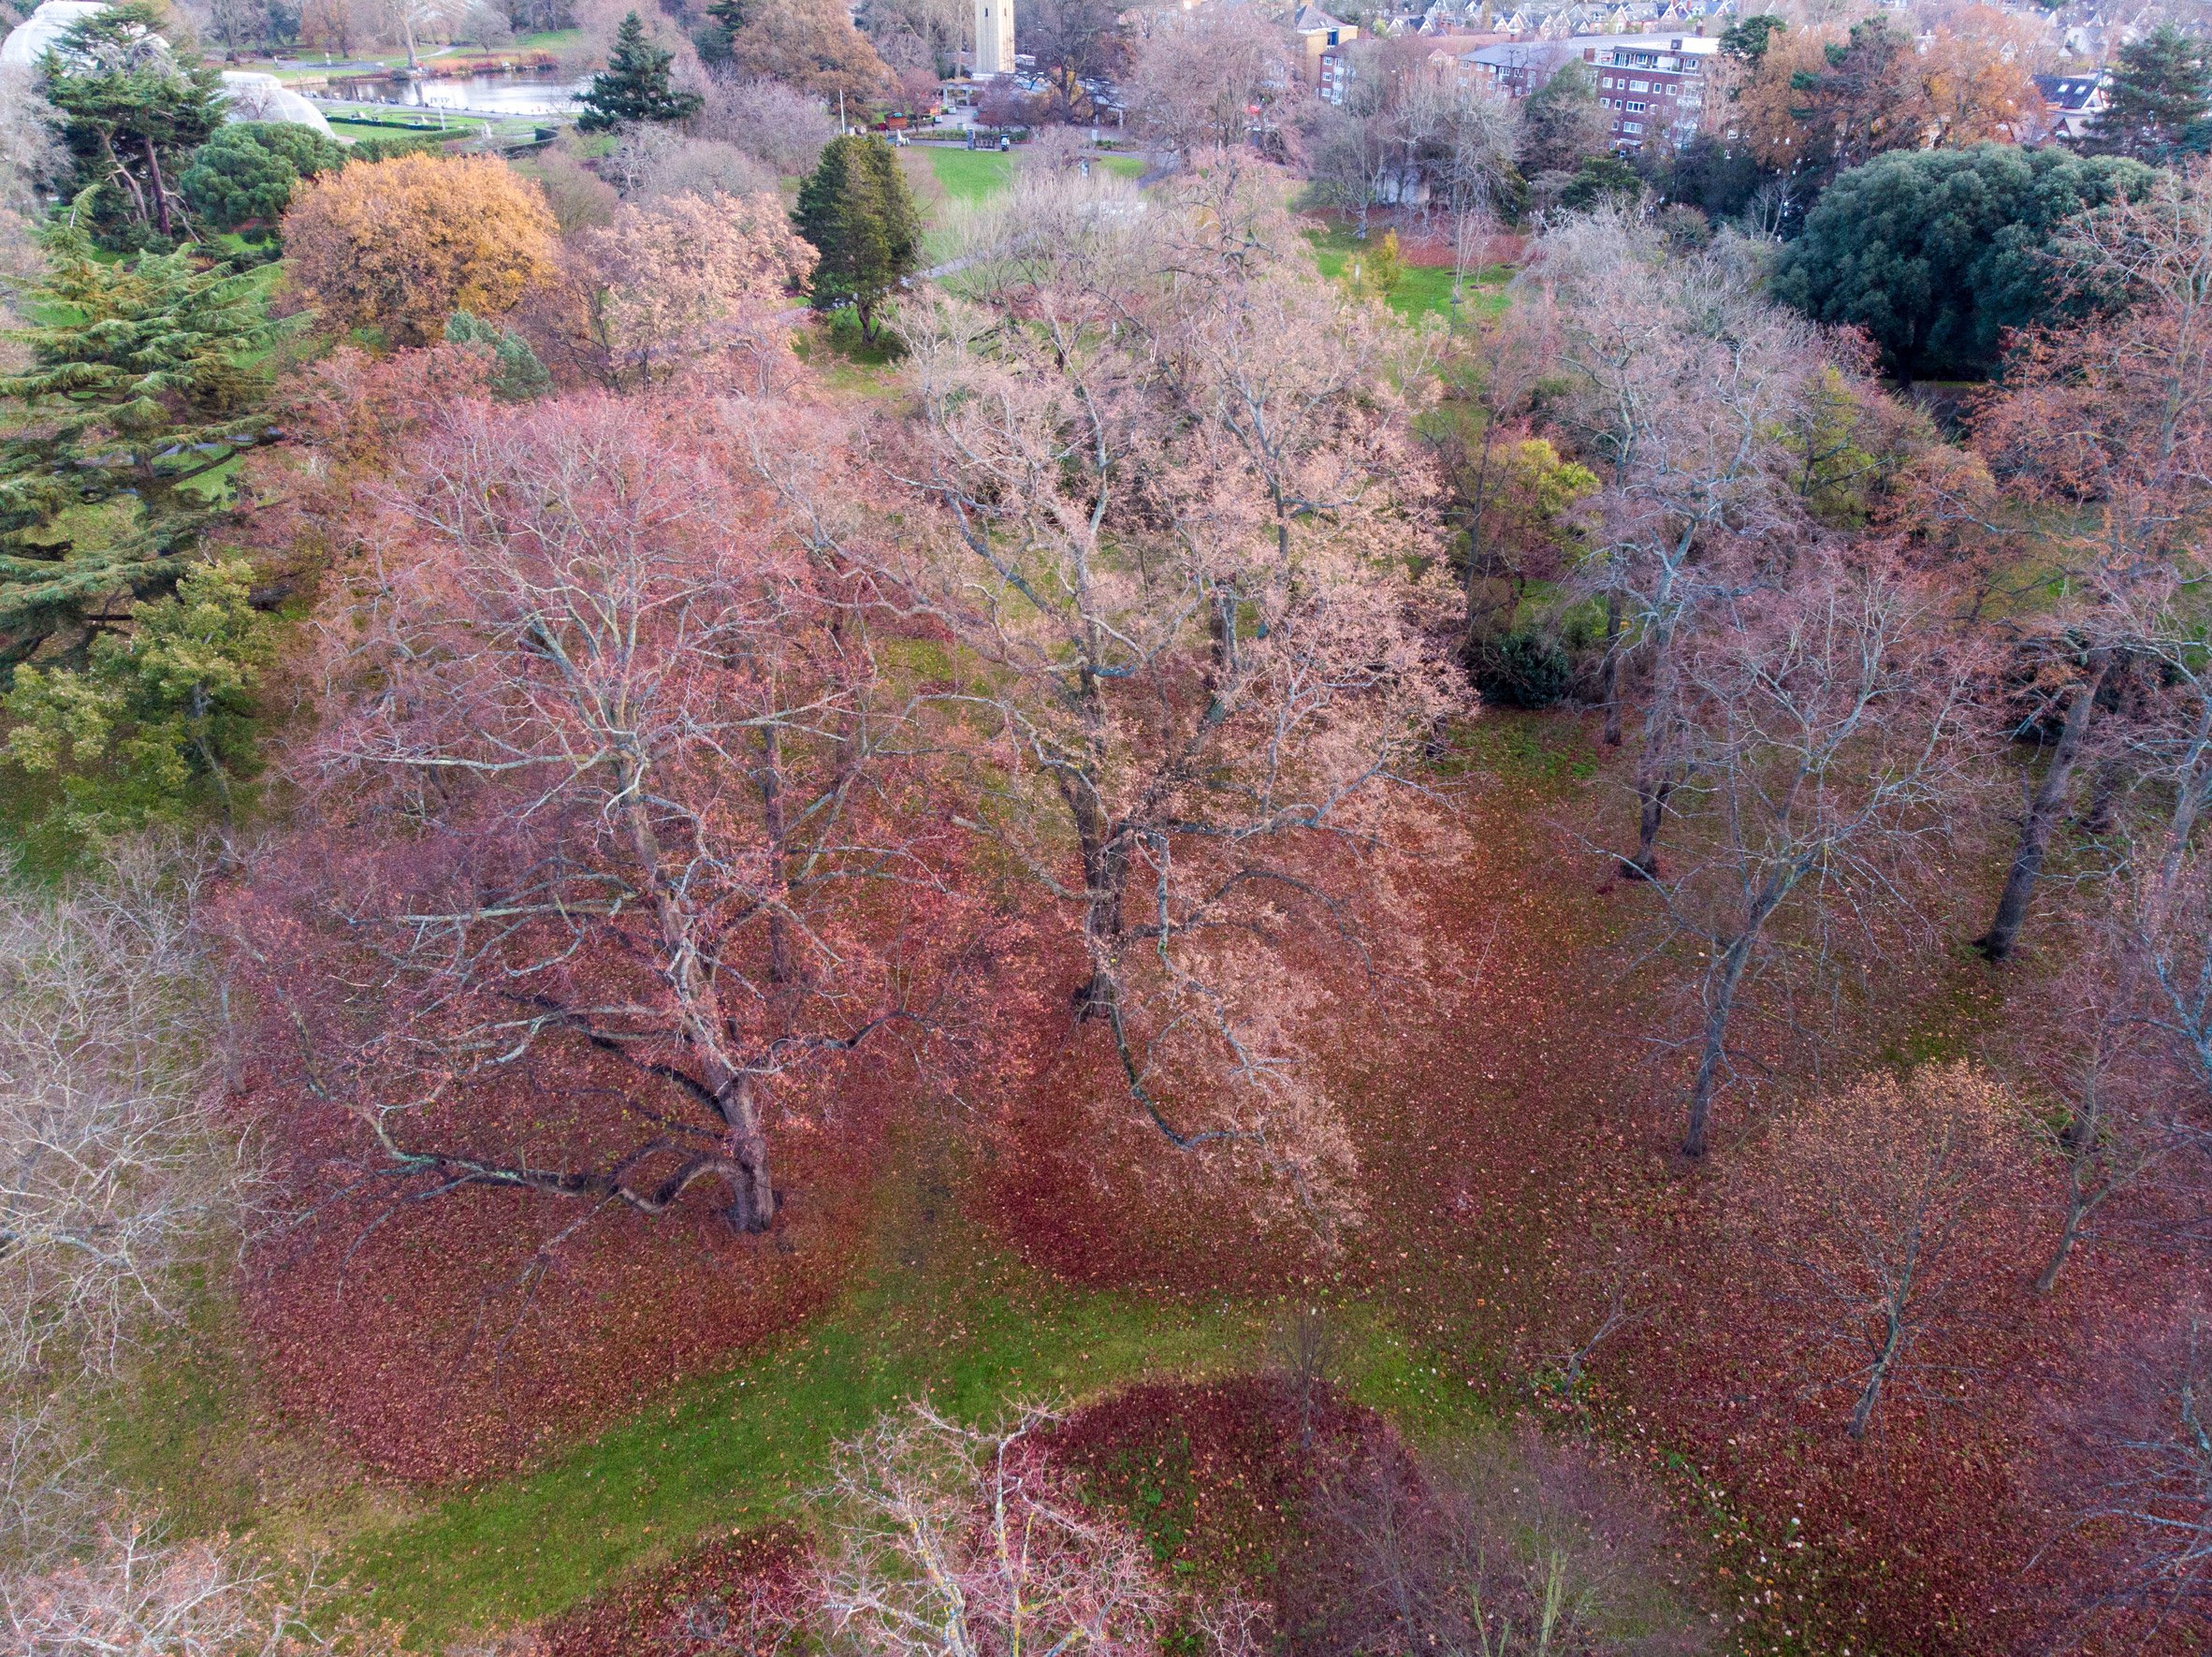 A photograph of Kew's trees in autumn